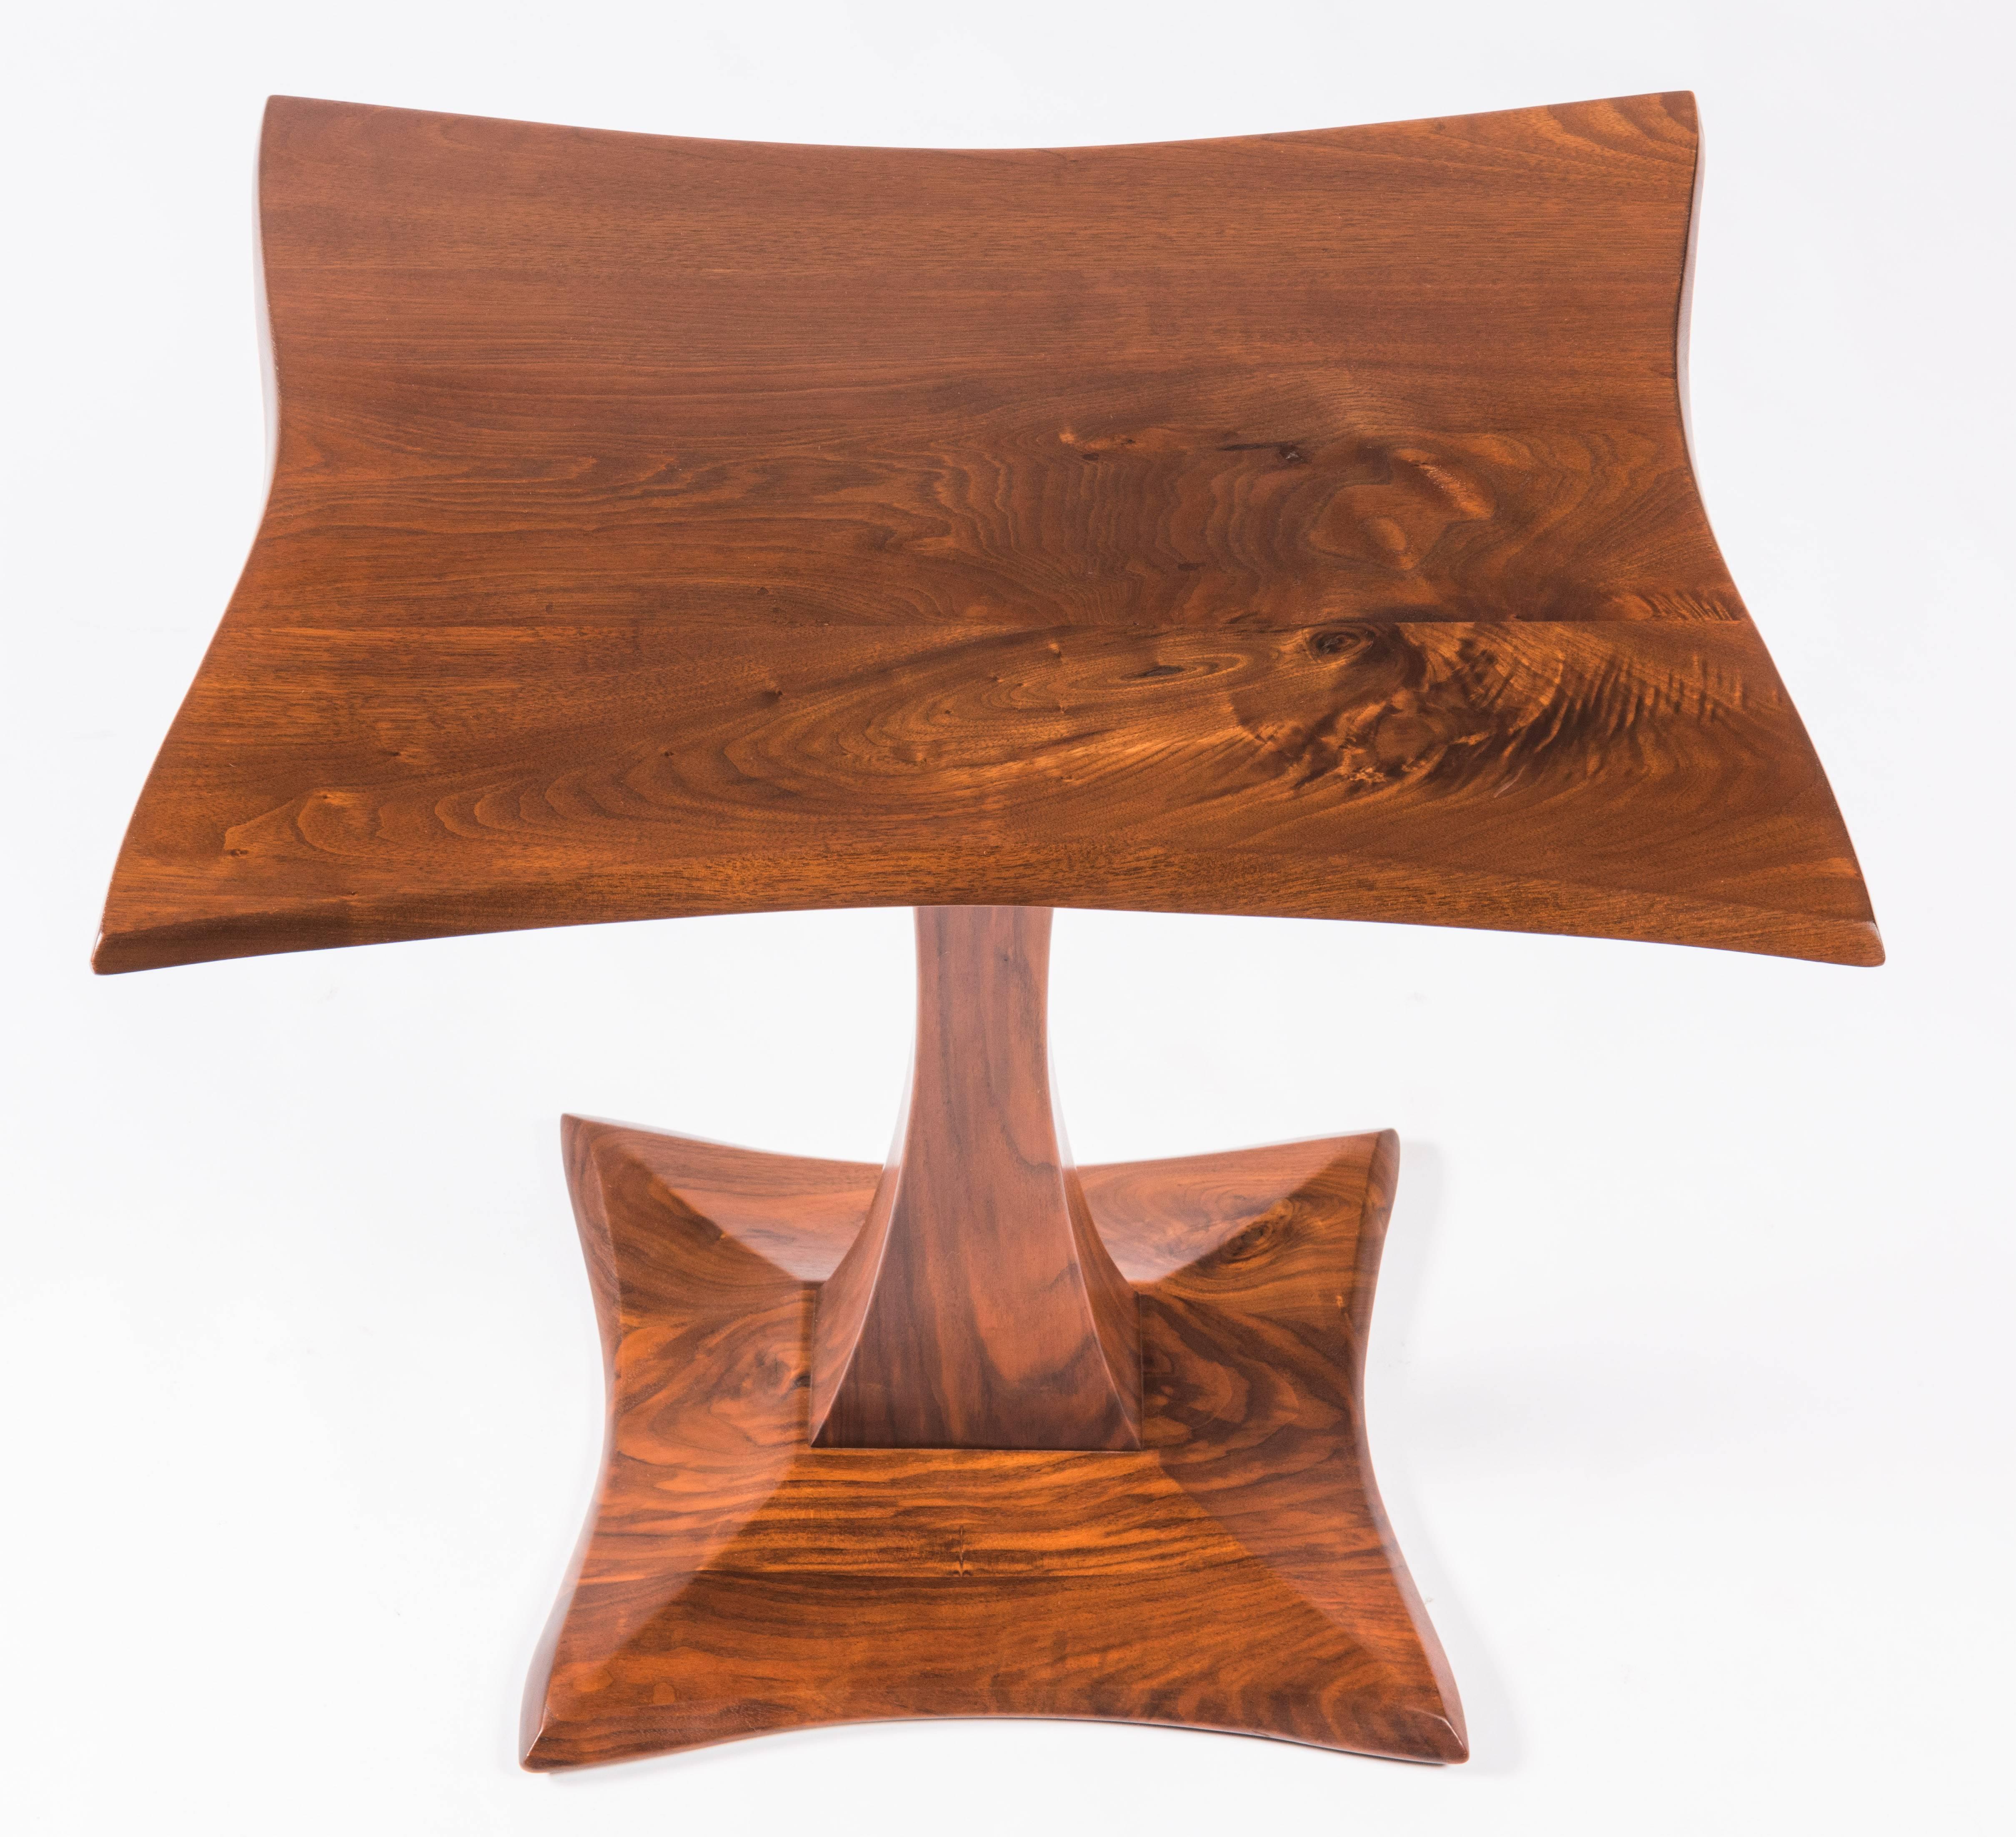 Pair of hand-carved walnut end or side tables by Robert Whitley. These tables and the following listing are from a single owner named Florence Green, who commissioned Whitley to create a large collection of his work between 1965-1975 for her home in